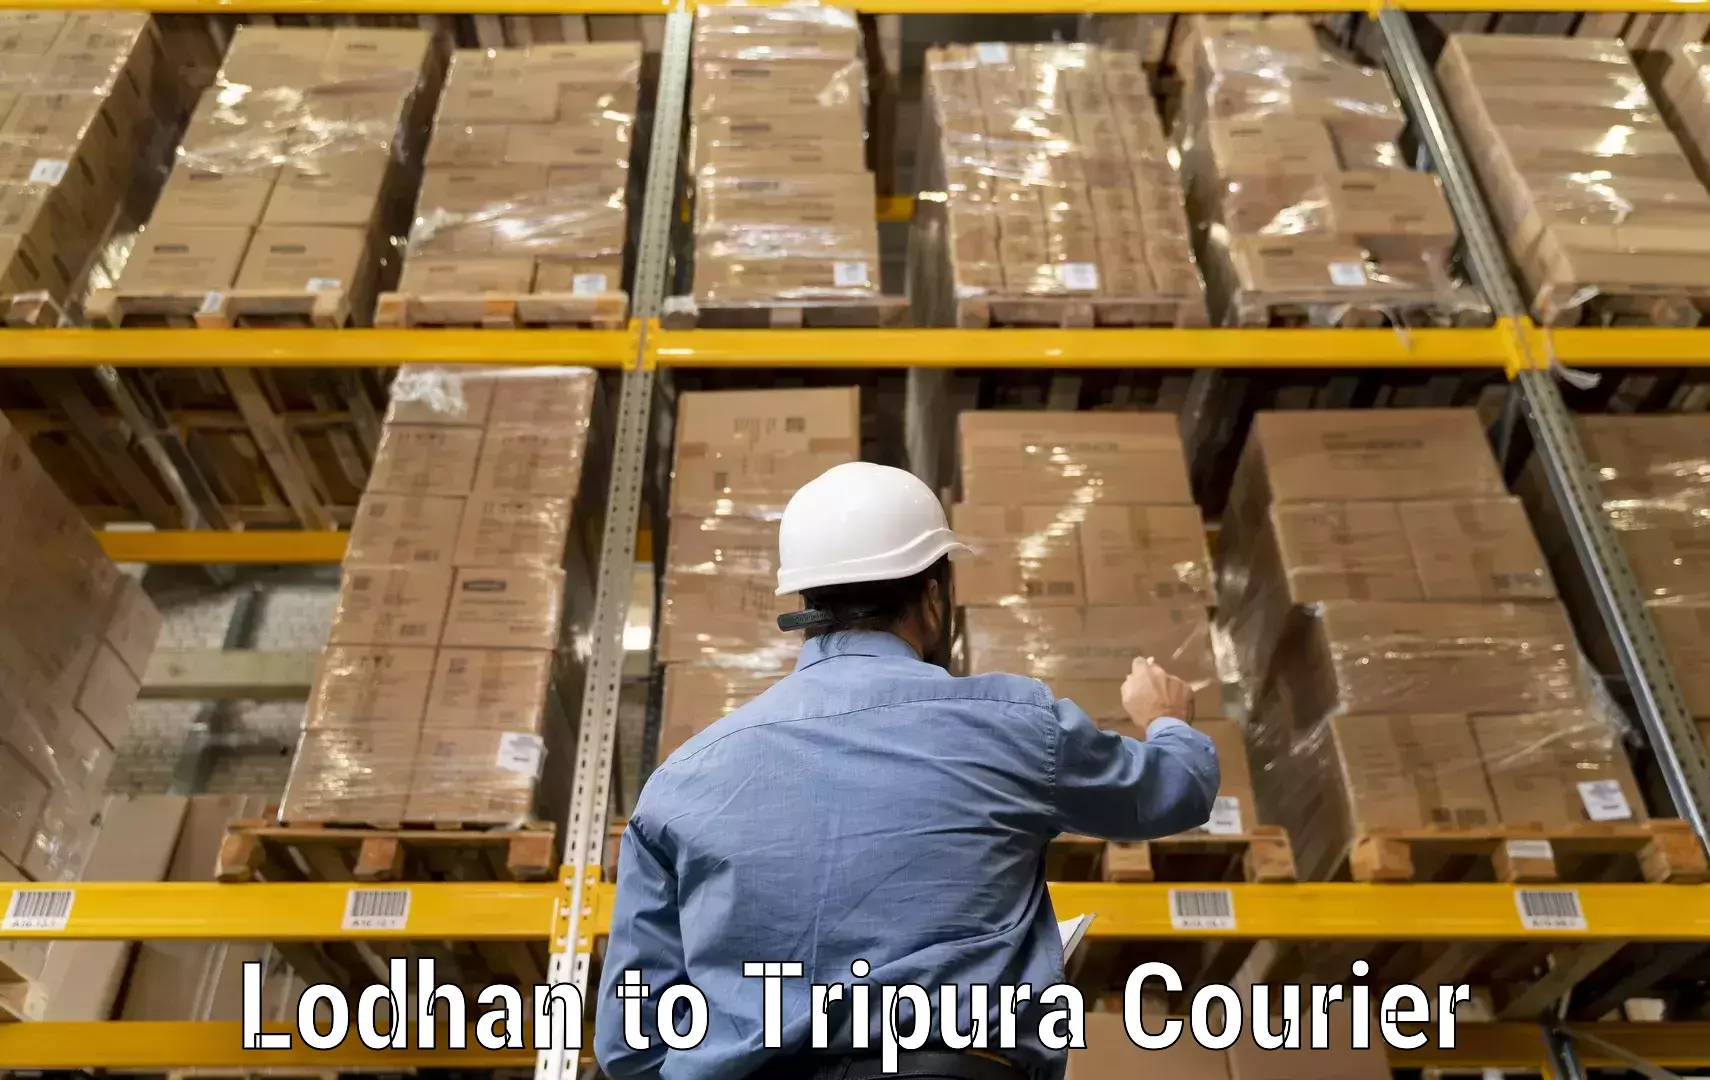 Quality courier partnerships Lodhan to Tripura